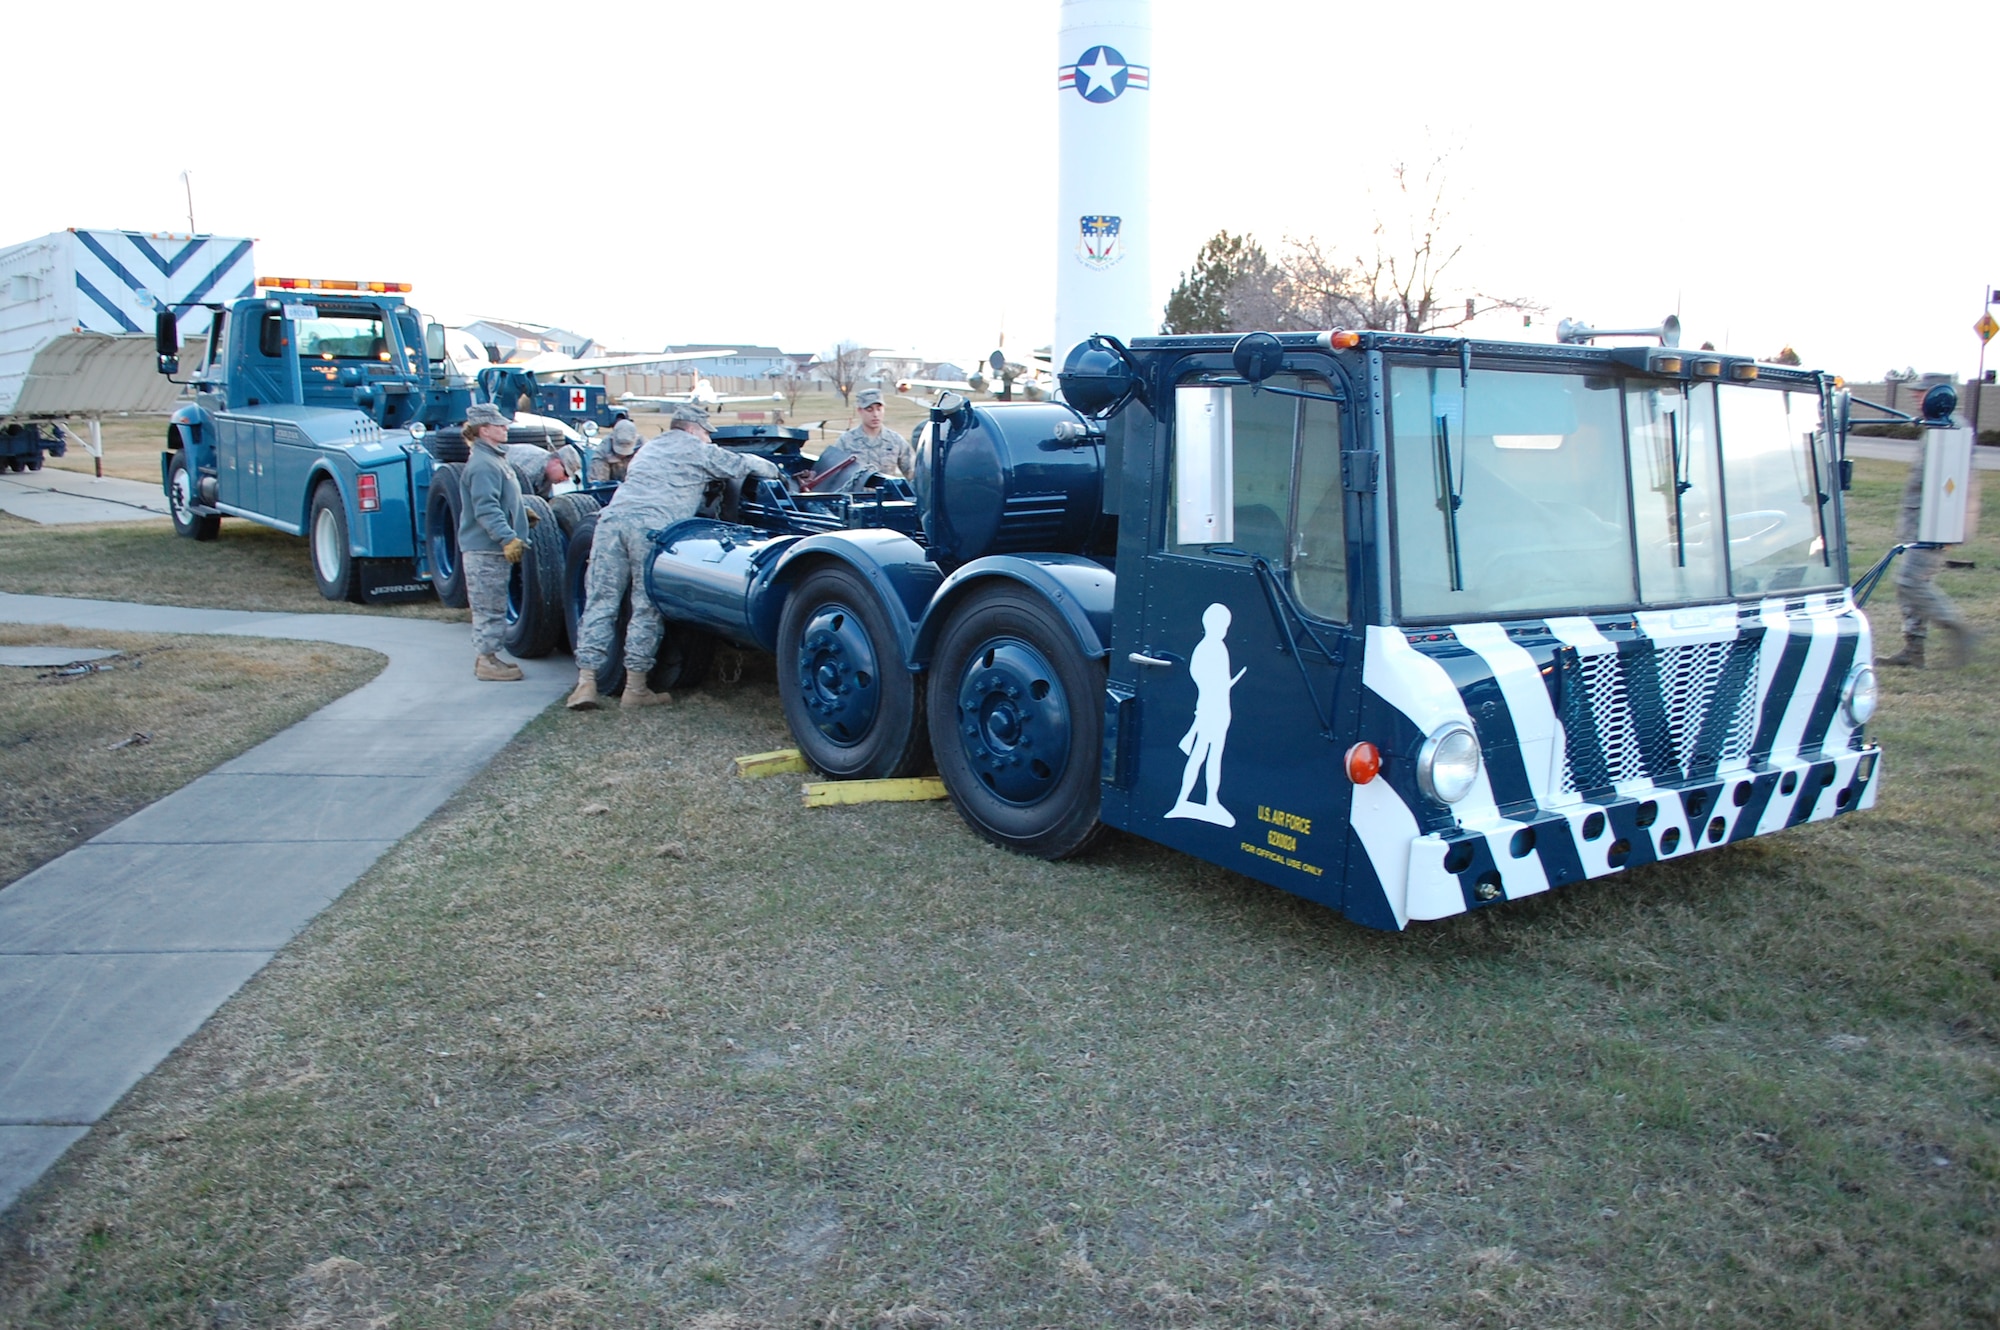 Members of the 341st Logistics Readiness Squadron work to unhook the Transporter Erector from the towlines used to move it from the Allied Trades Shop back to its location at the Malmstrom Museum. (U.S. Air Force photo/Airman 1st Class Kristina Overton)